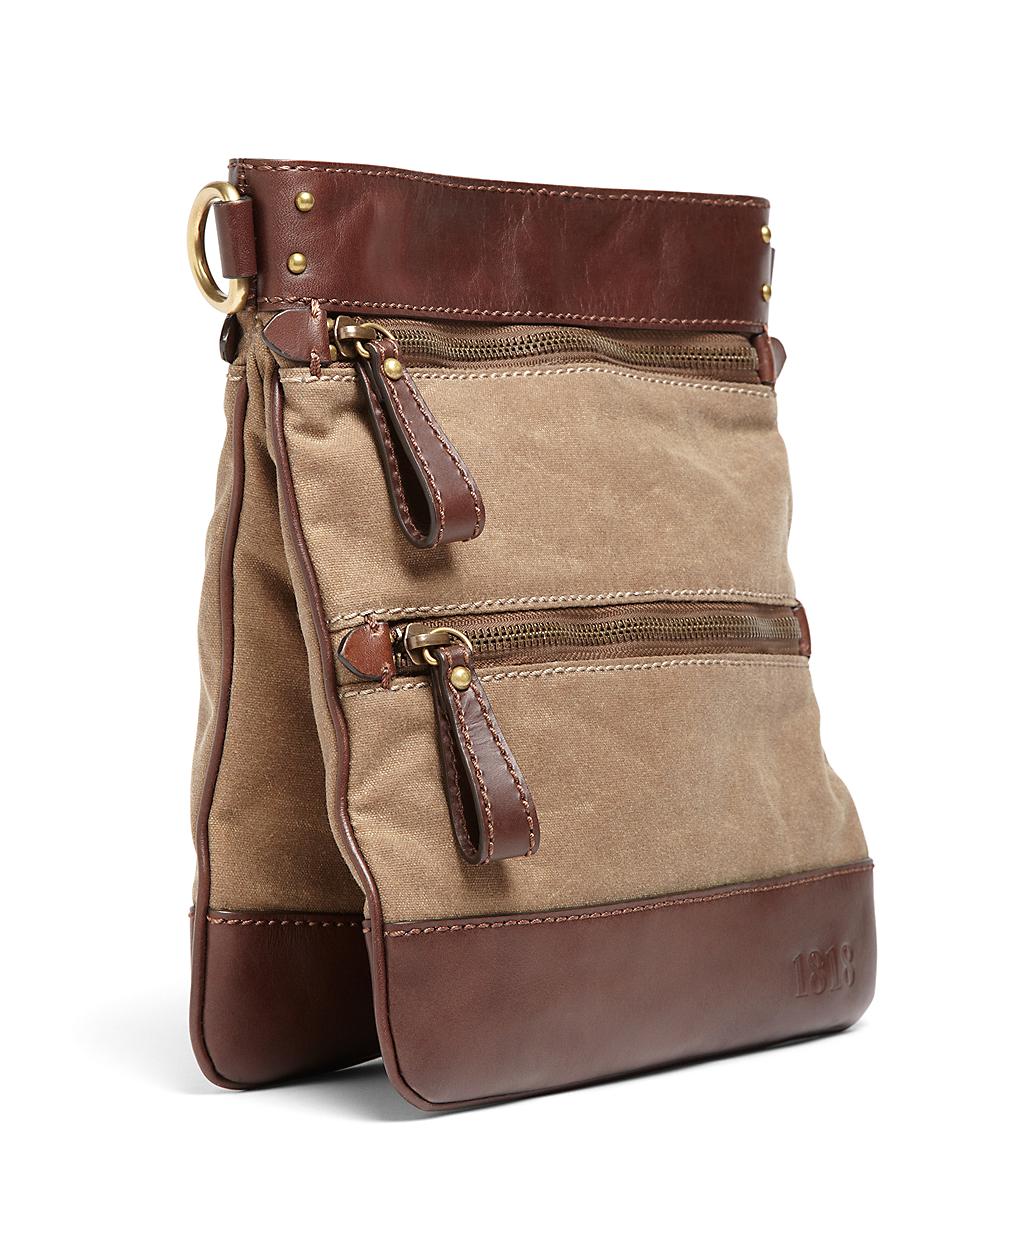 Brooks Brothers Waxed Cotton Canvas Crossbody Bag in Tan (Brown) - Lyst